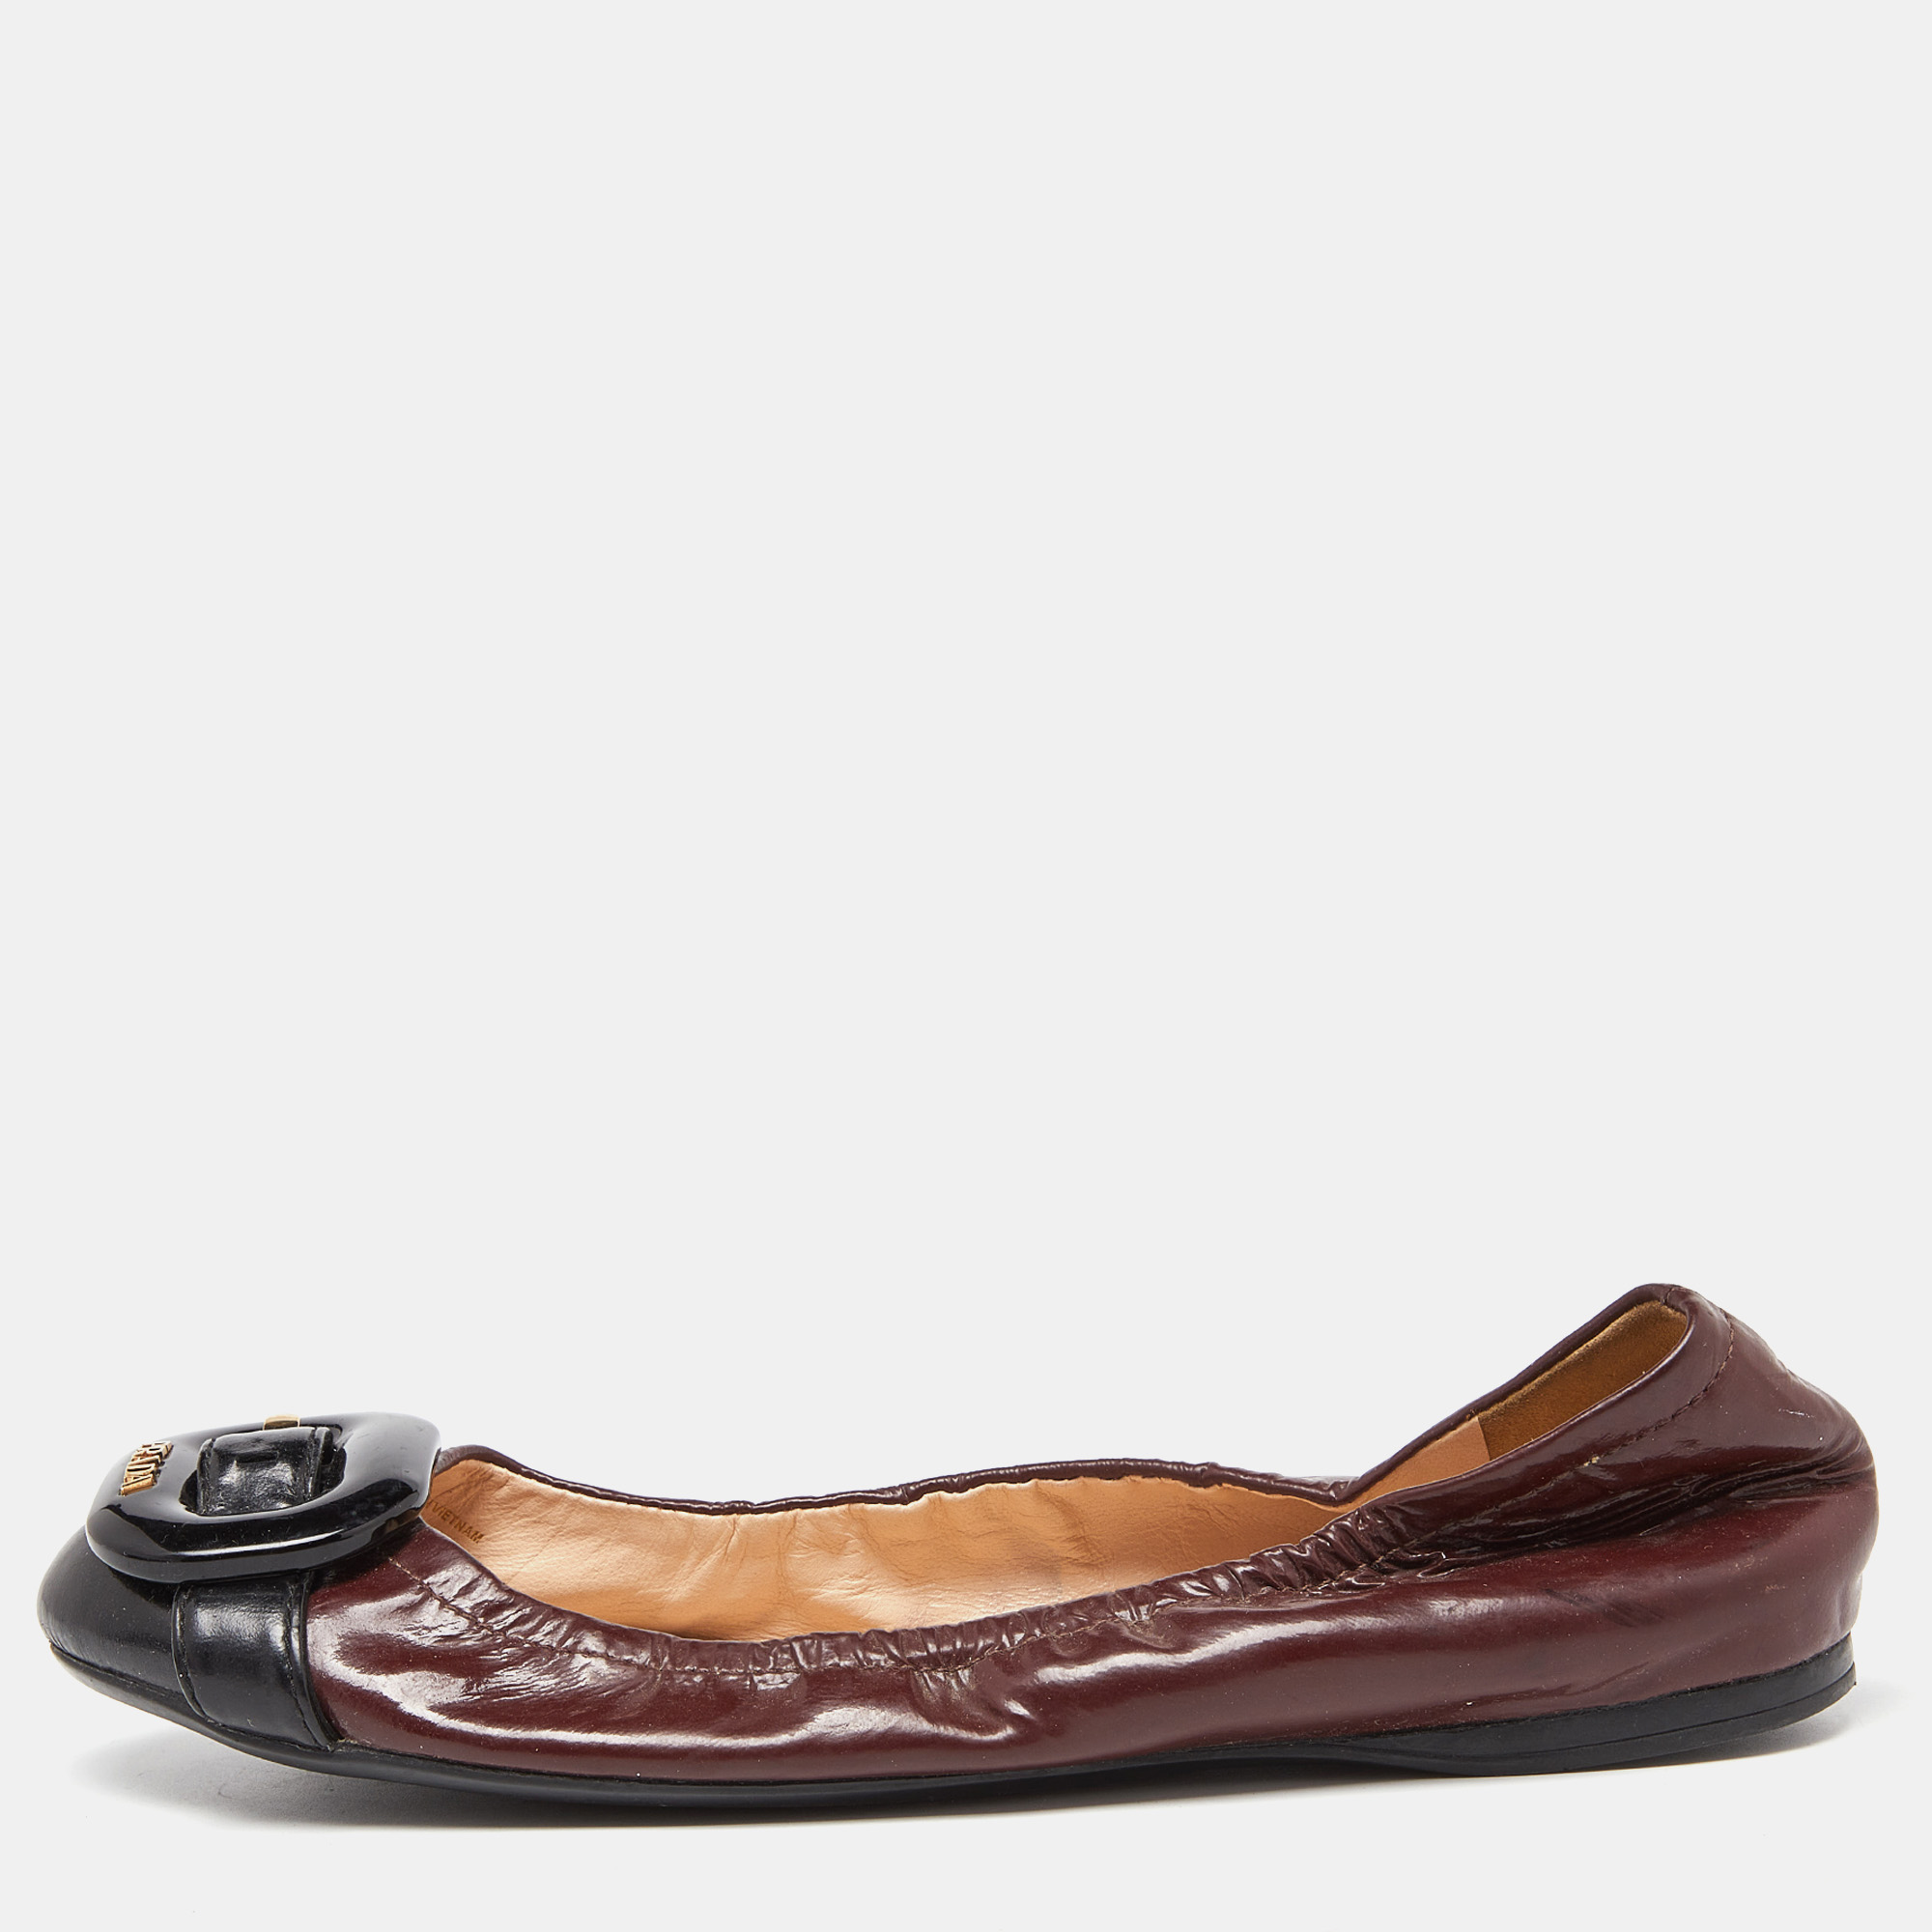 Pre-owned Prada Brown/black Patent Leather Ballet Flats Size 38